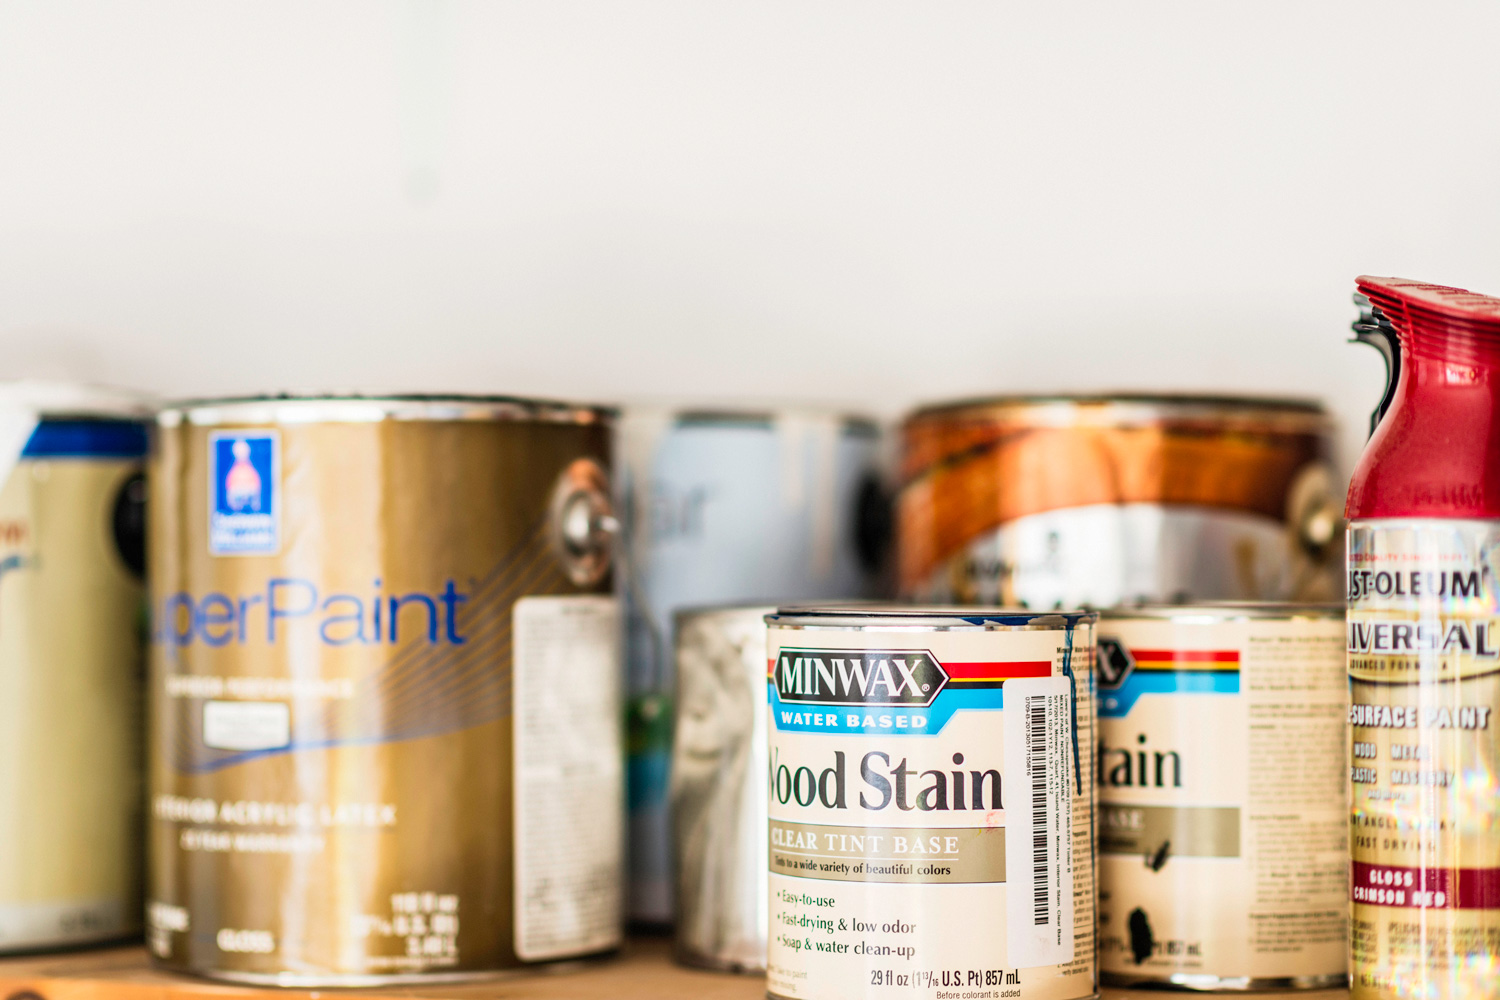 A horizontal shot of a collection of opened and unopened American brand cans of paint, wood stain and paint sprays organized neatly on a wooden shelf. The brands include cans of indoor house paint by Sherwin Williams, spray paint by Rustoleum, and wood stain by Minwax.